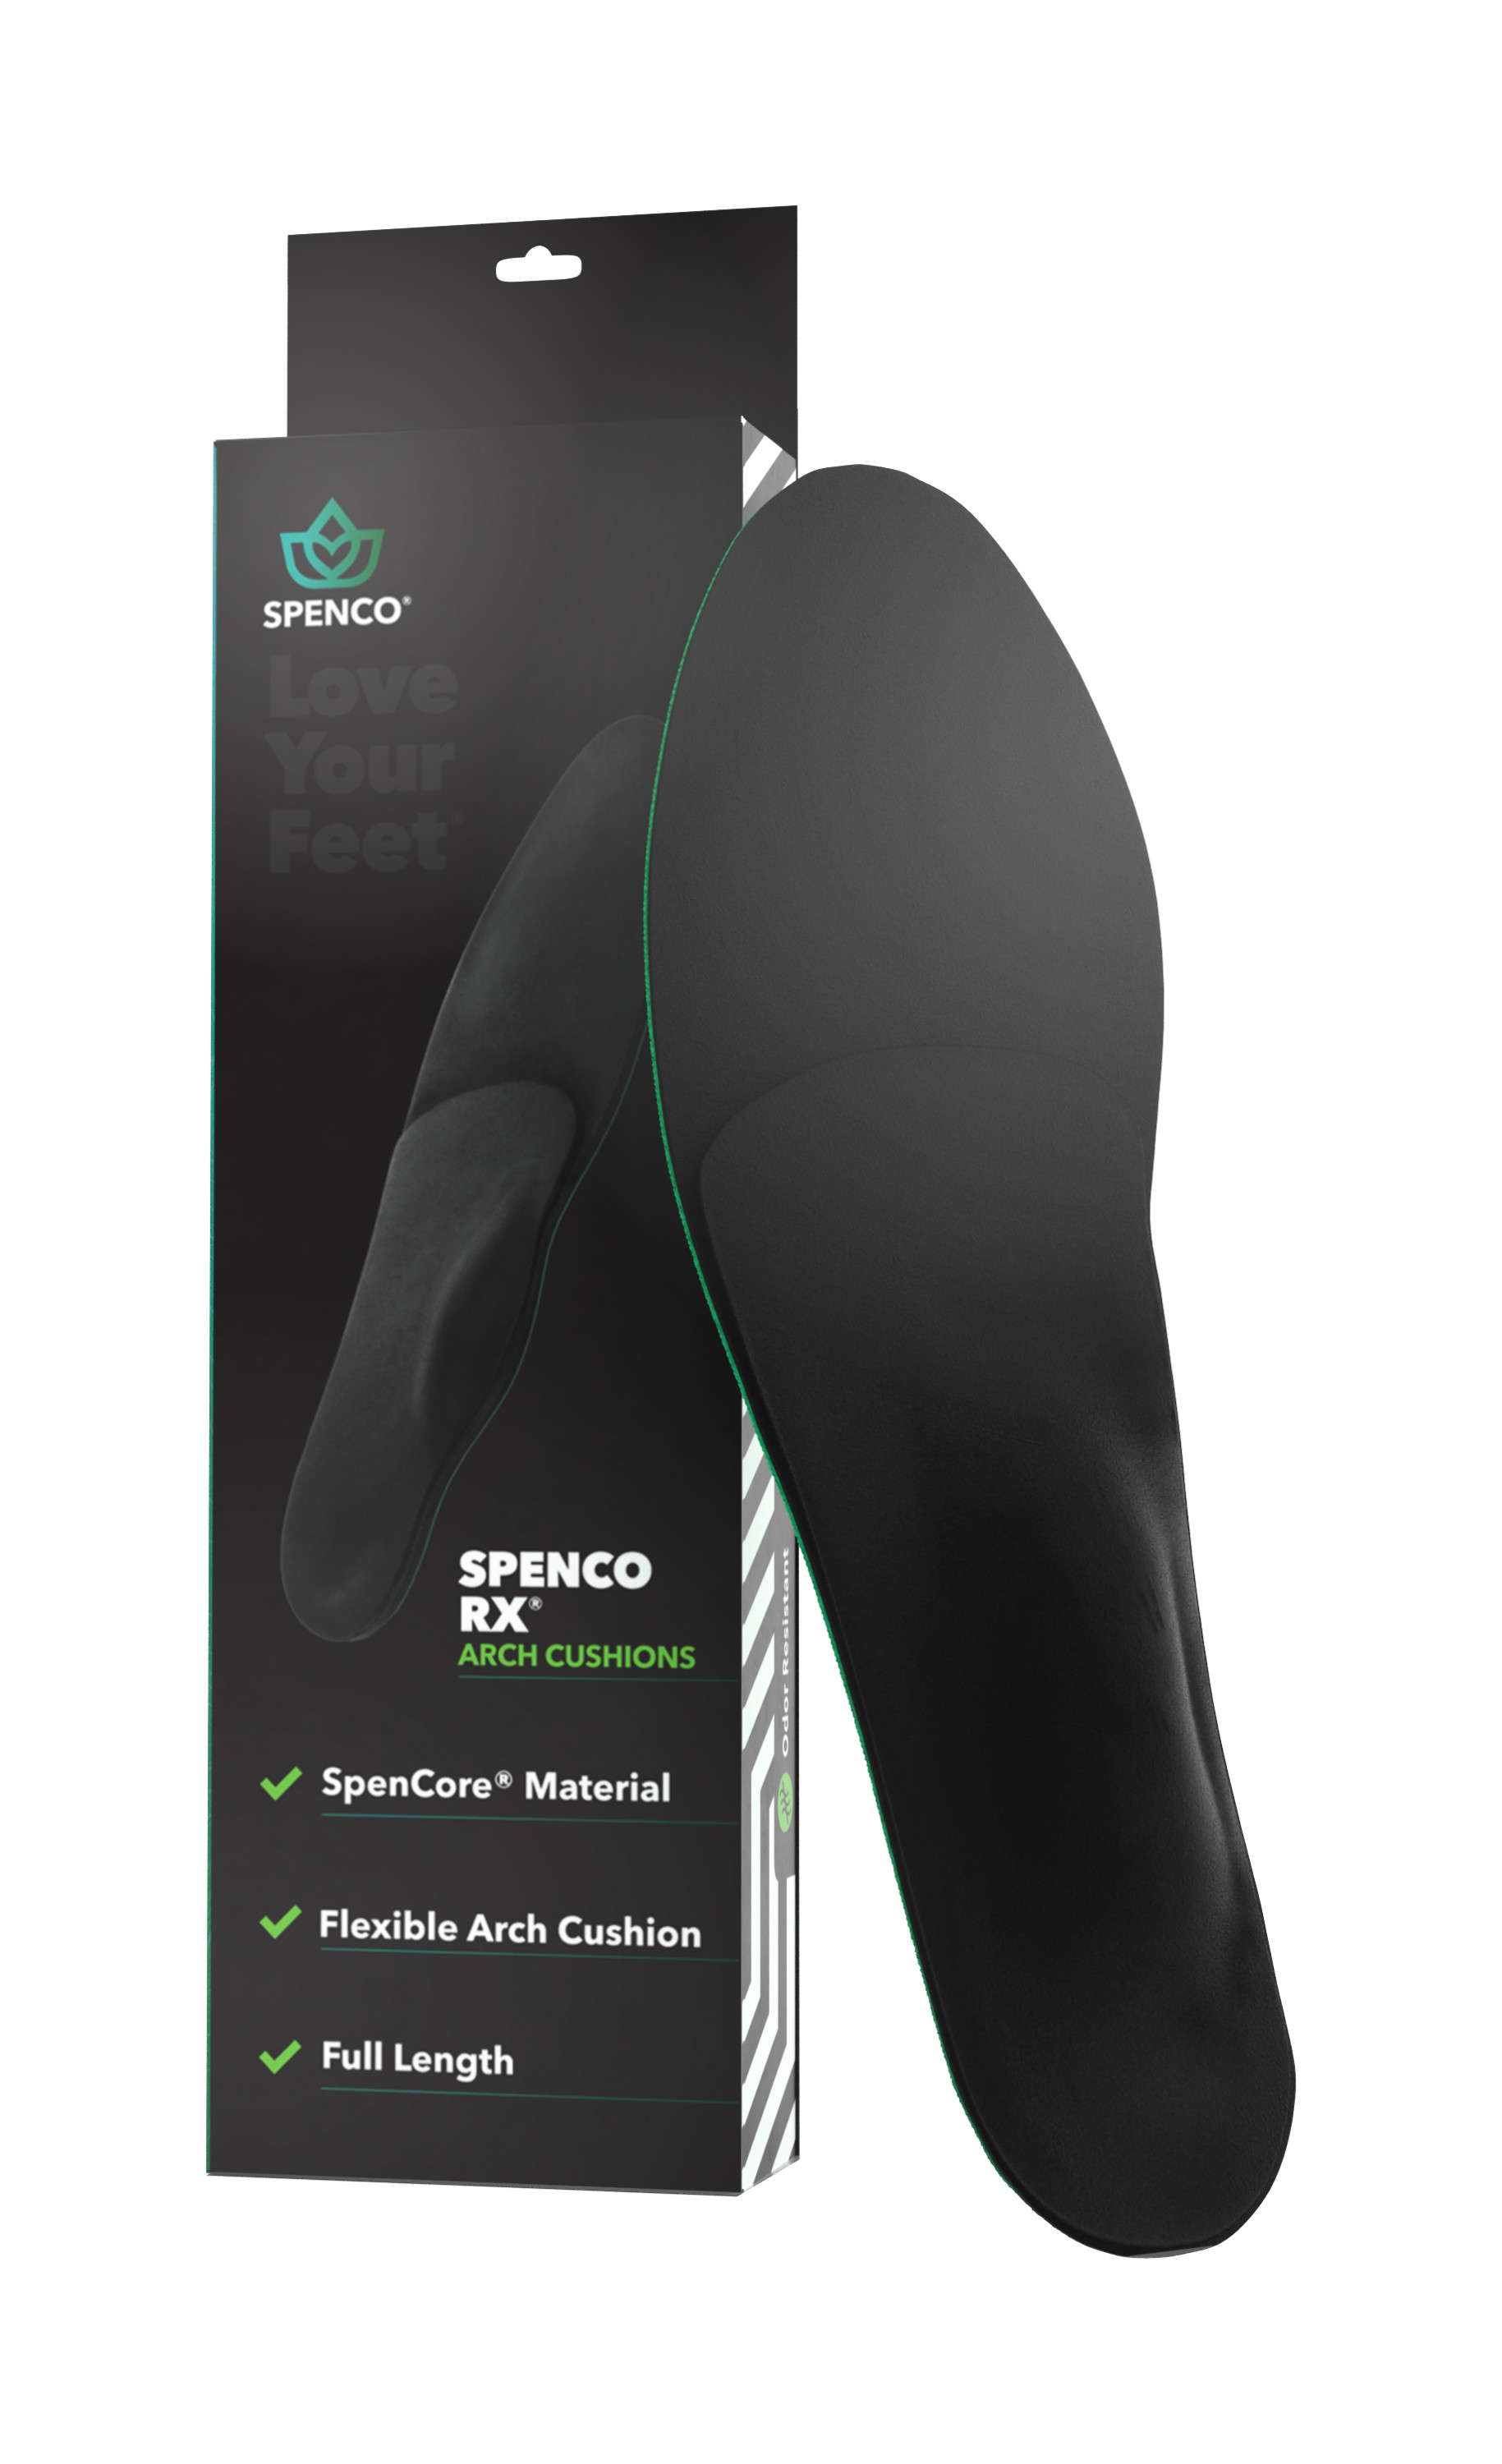 Spenco Rx Arch Cushions Insole - image 1 of 4